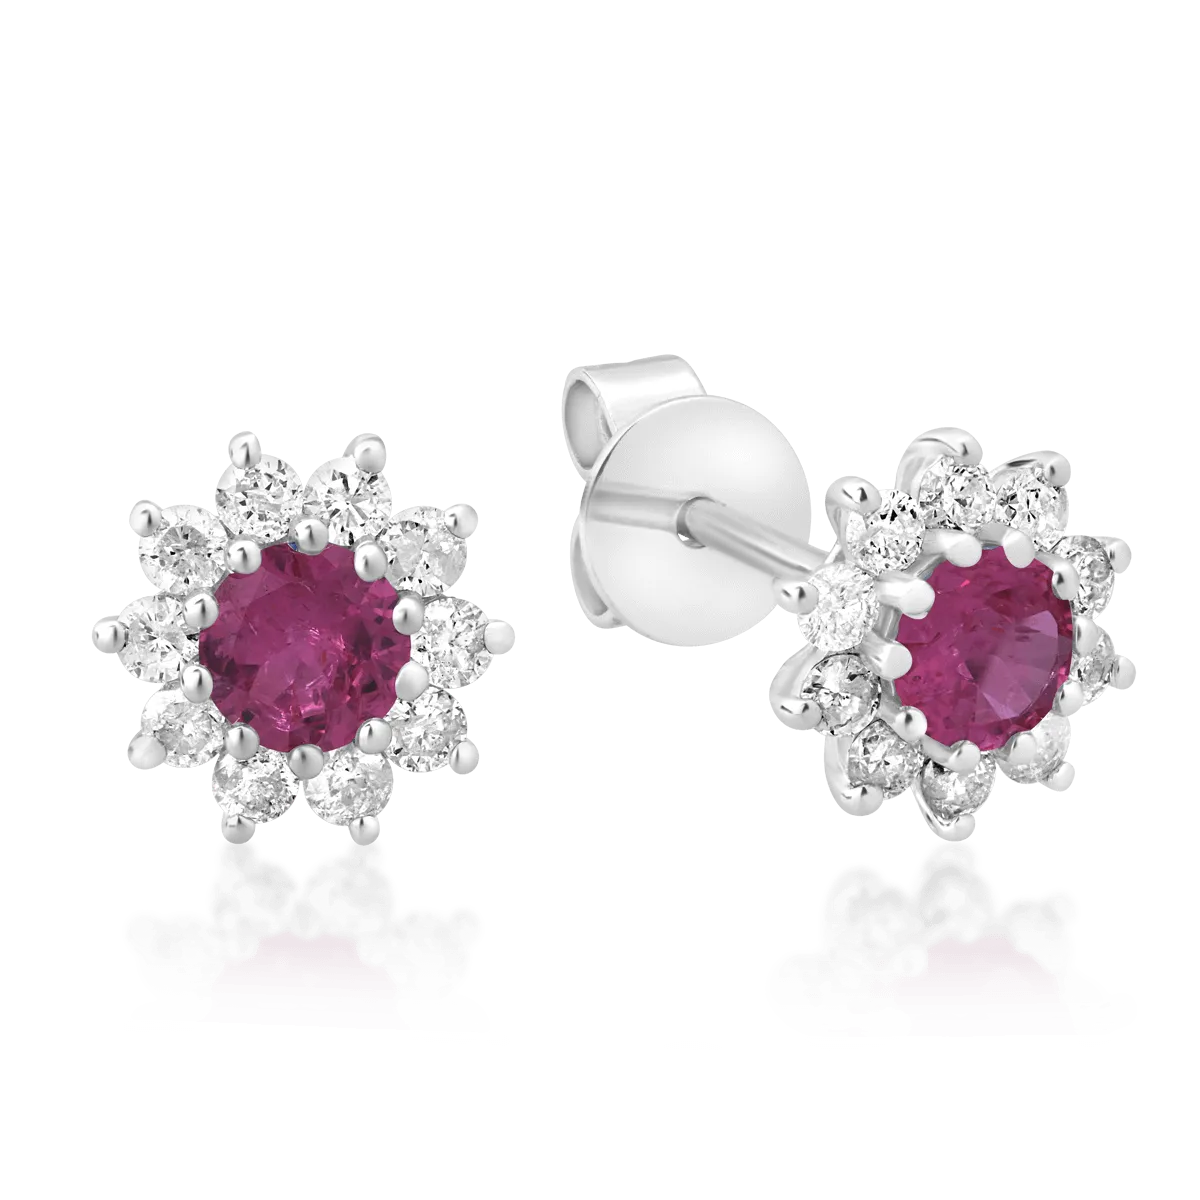 18K white gold earrings with 0.4ct light pink sapphires and 0.3ct diamonds